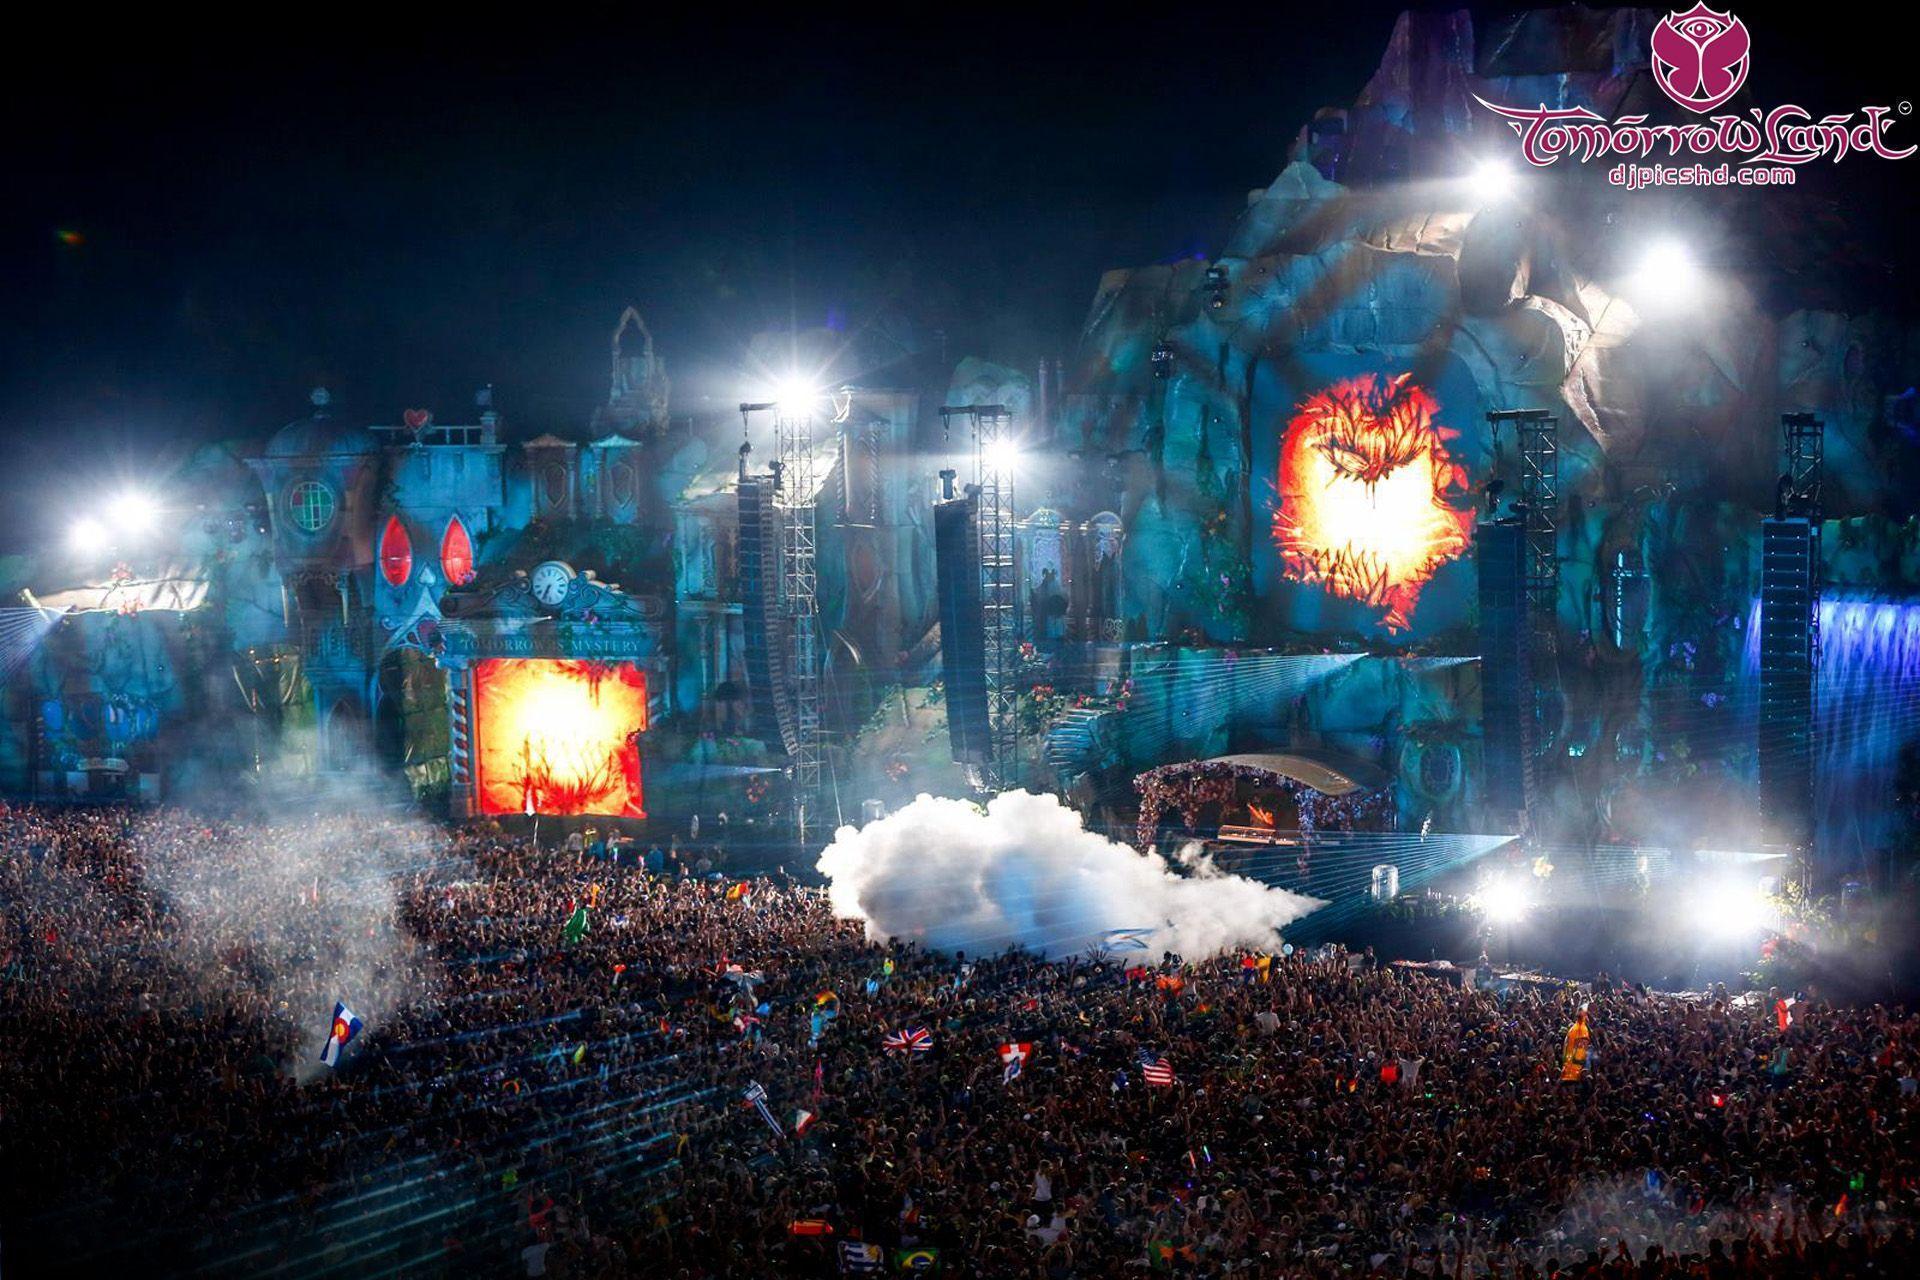 Complete Artist Lineup For Phase 1 Of Tomorrowland 2015 Released